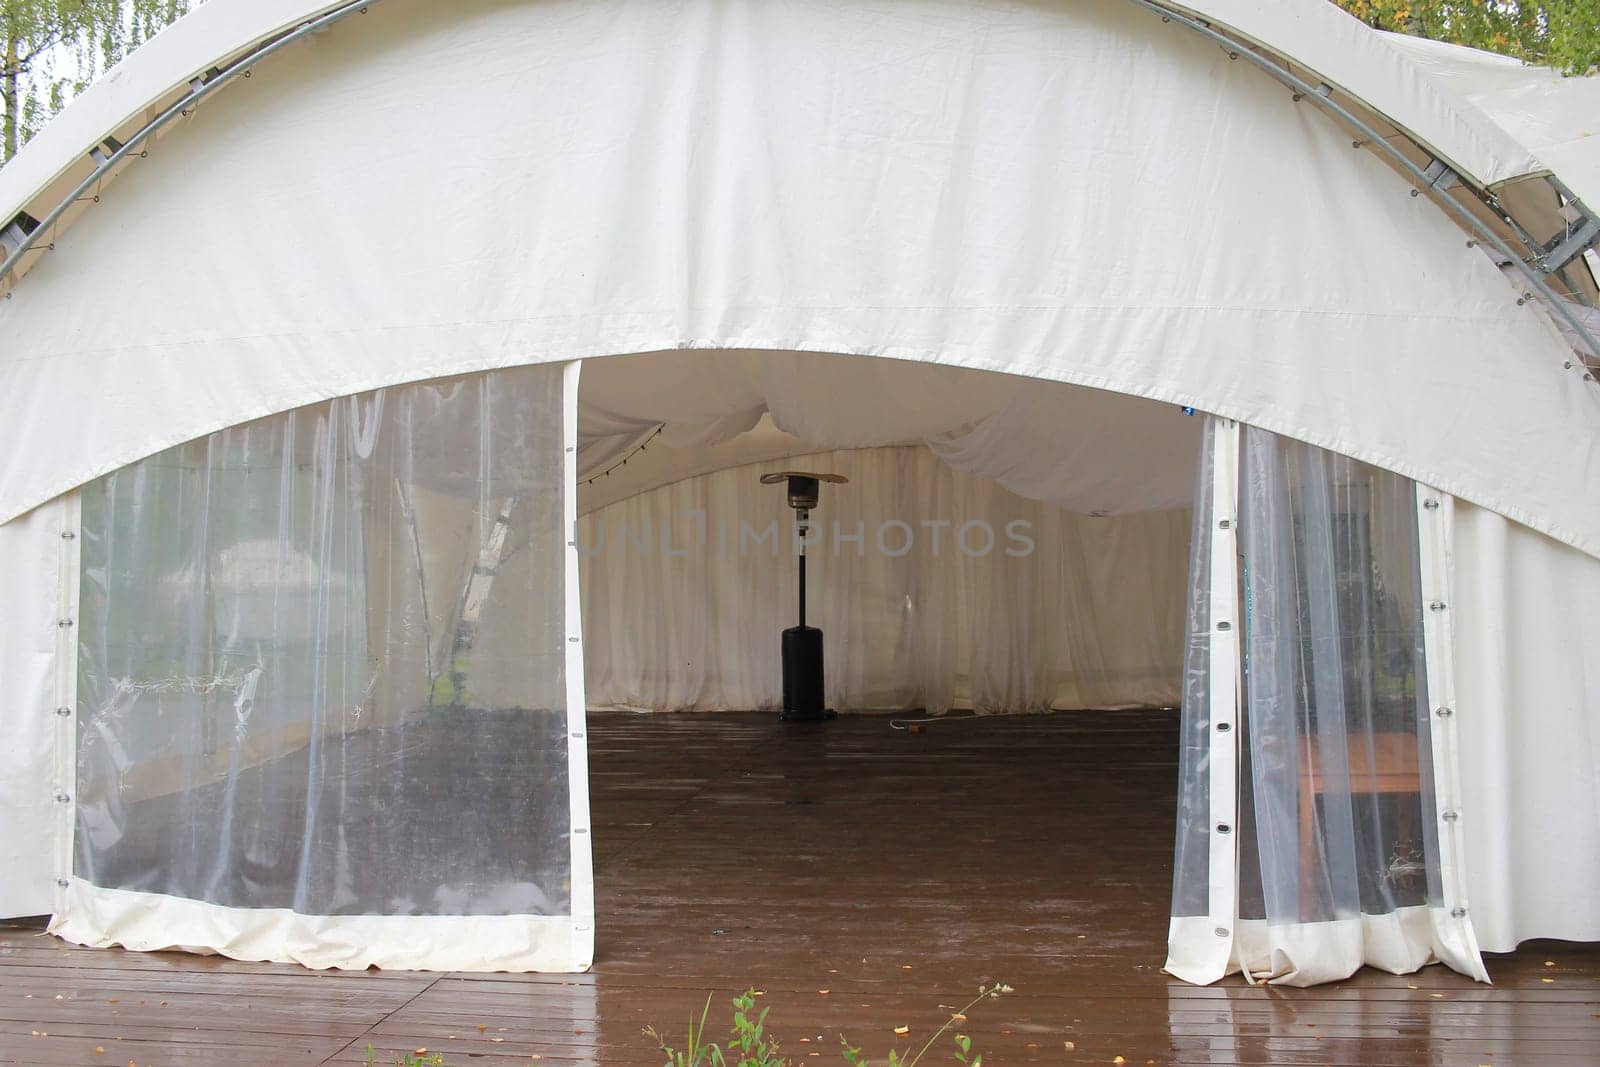 Photo A white tent veranda is a street stage for performances and celebrations.